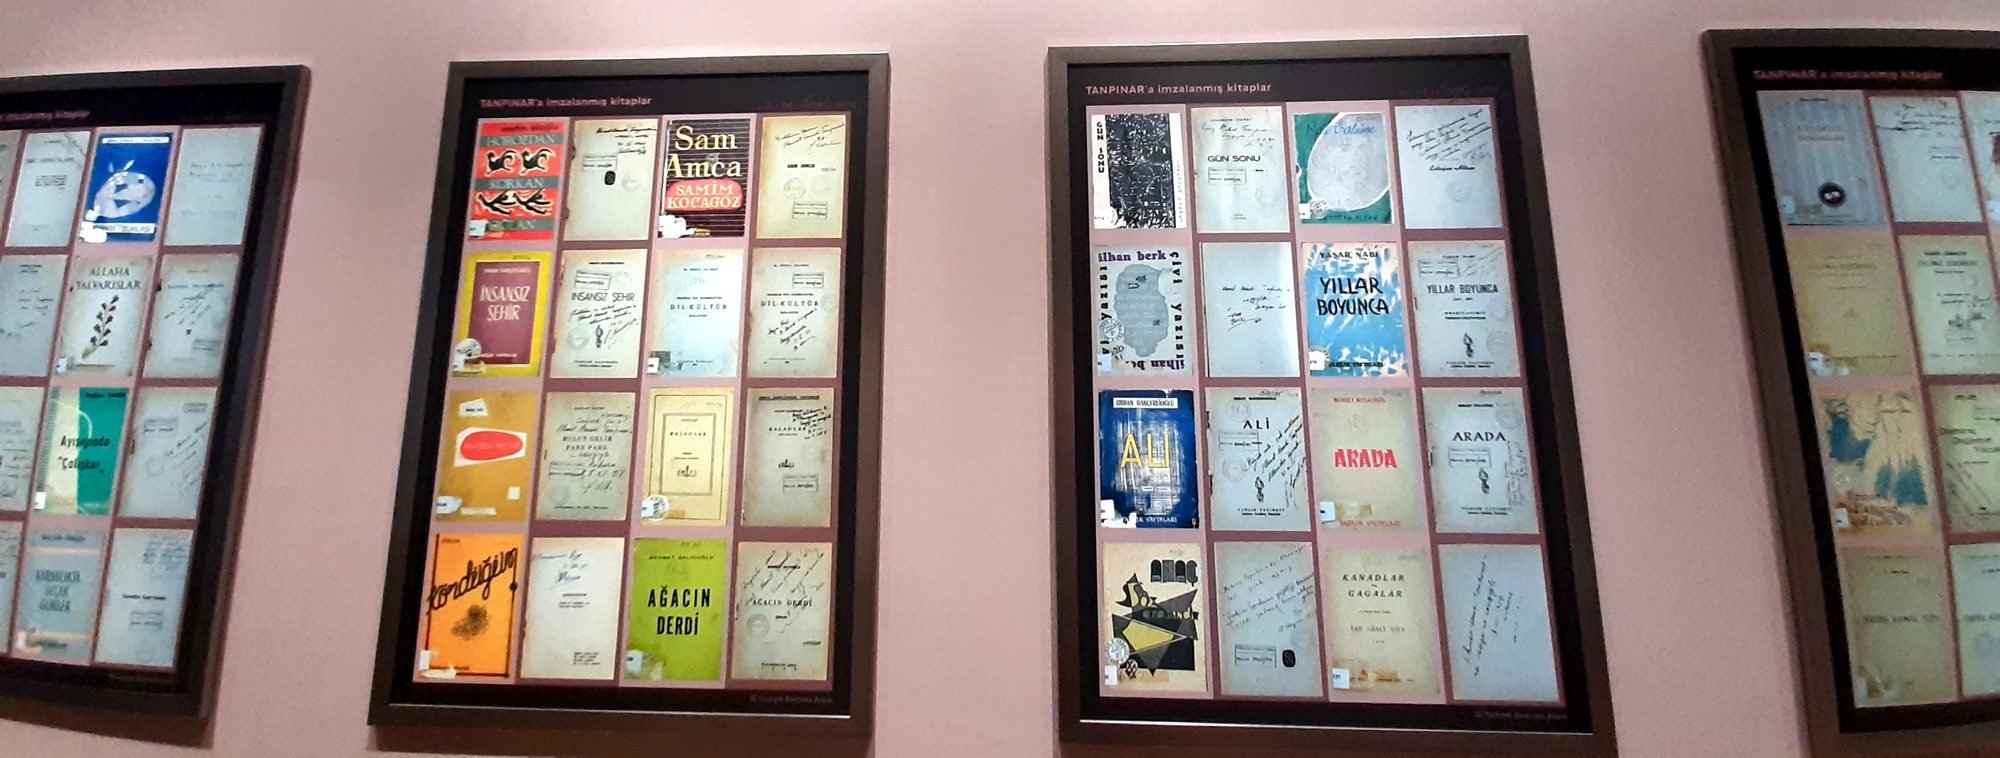 Books that were signed by their writers for Ahmet Hamdi Tanpınar in the exhibition, Tarık Zafer Tunaya Center, Istanbul. (Archive Photo)